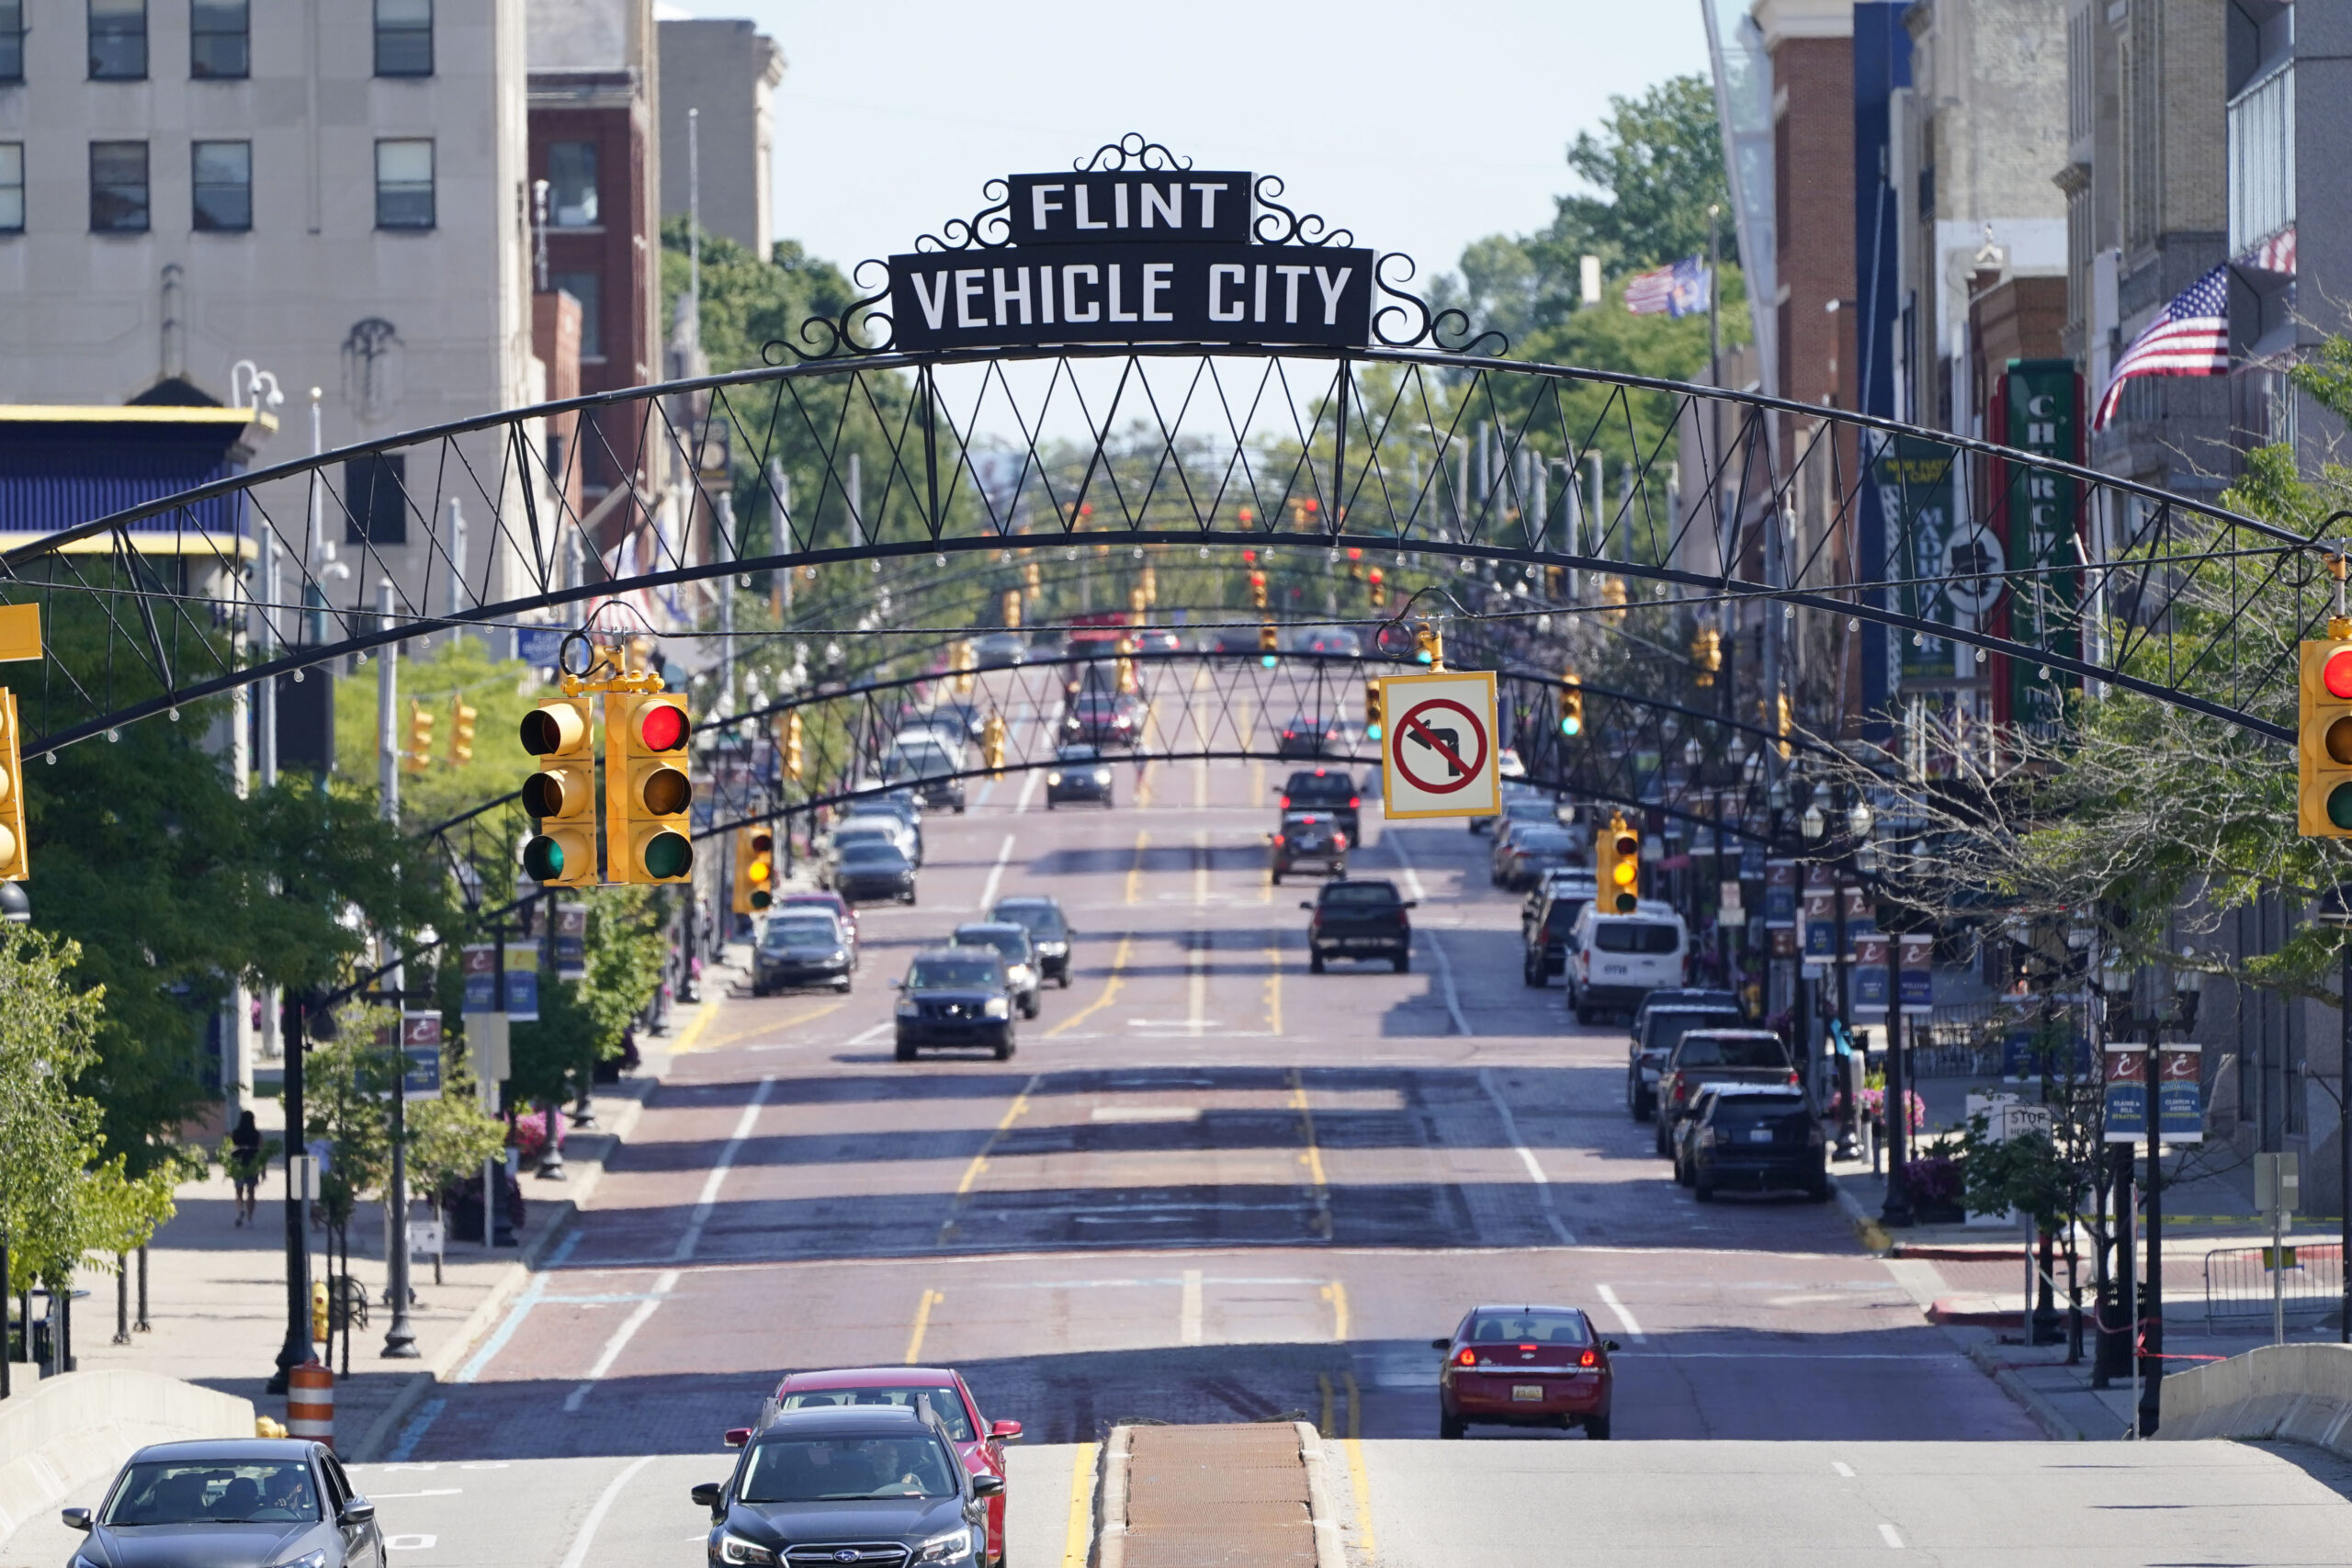 Entrance to Flint Michigan Known as the Vehicle City